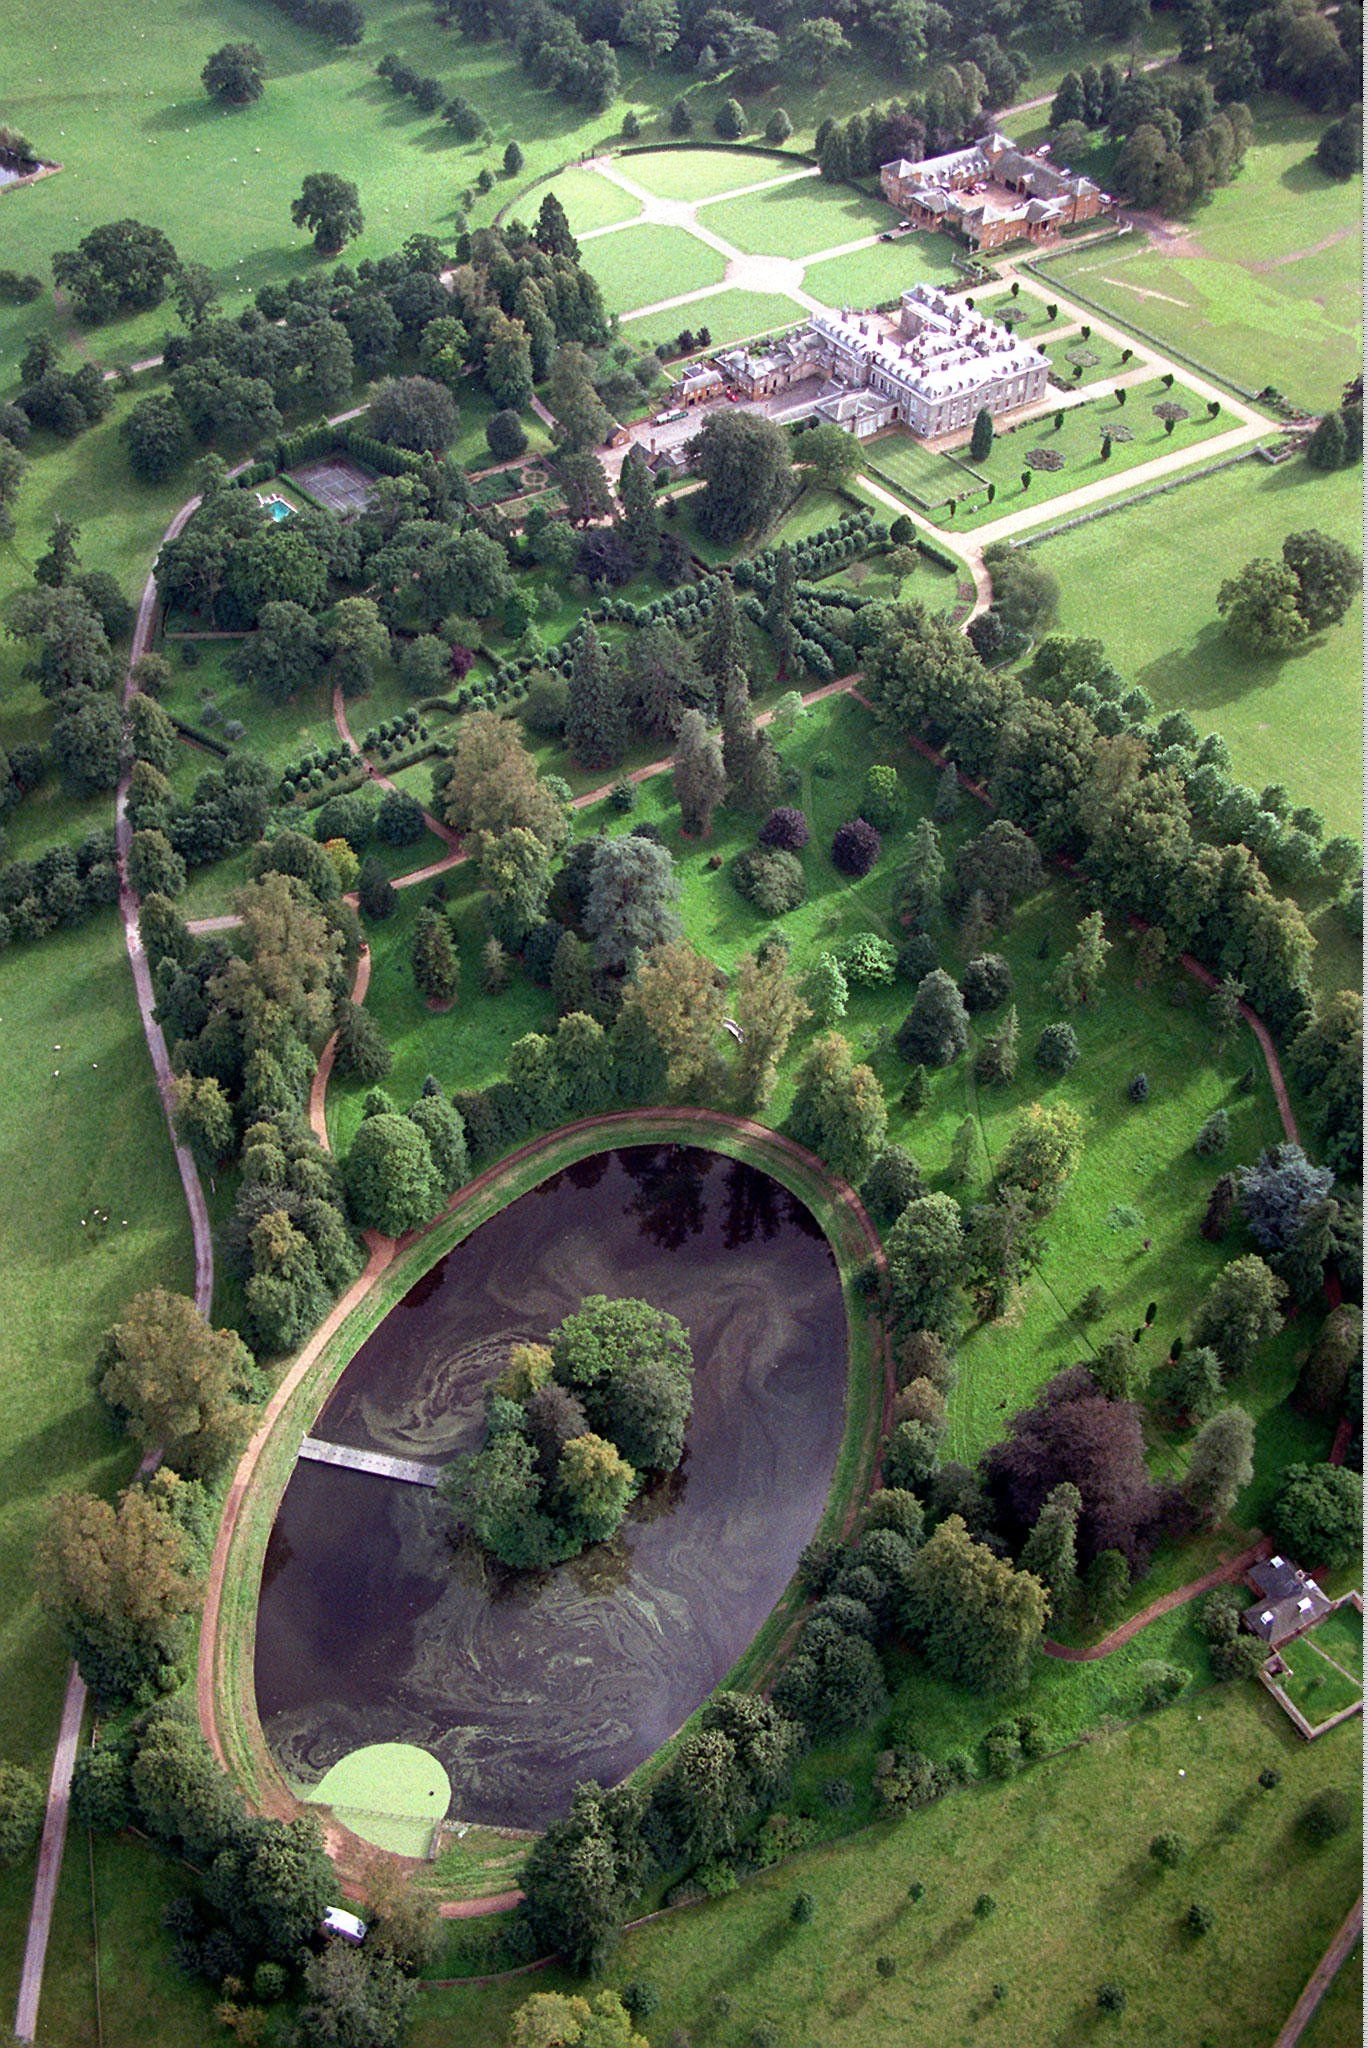 <p>This is an aerial view of the island in the ornamental lake known as The Round Oval on the grounds of the Spencer family estate in Althorp, England, where Princess Diana was buried following her funeral on Sept. 6, 1997.</p><p>There are 36 oak trees lining a path to the lake -- one for each year of her life.</p>